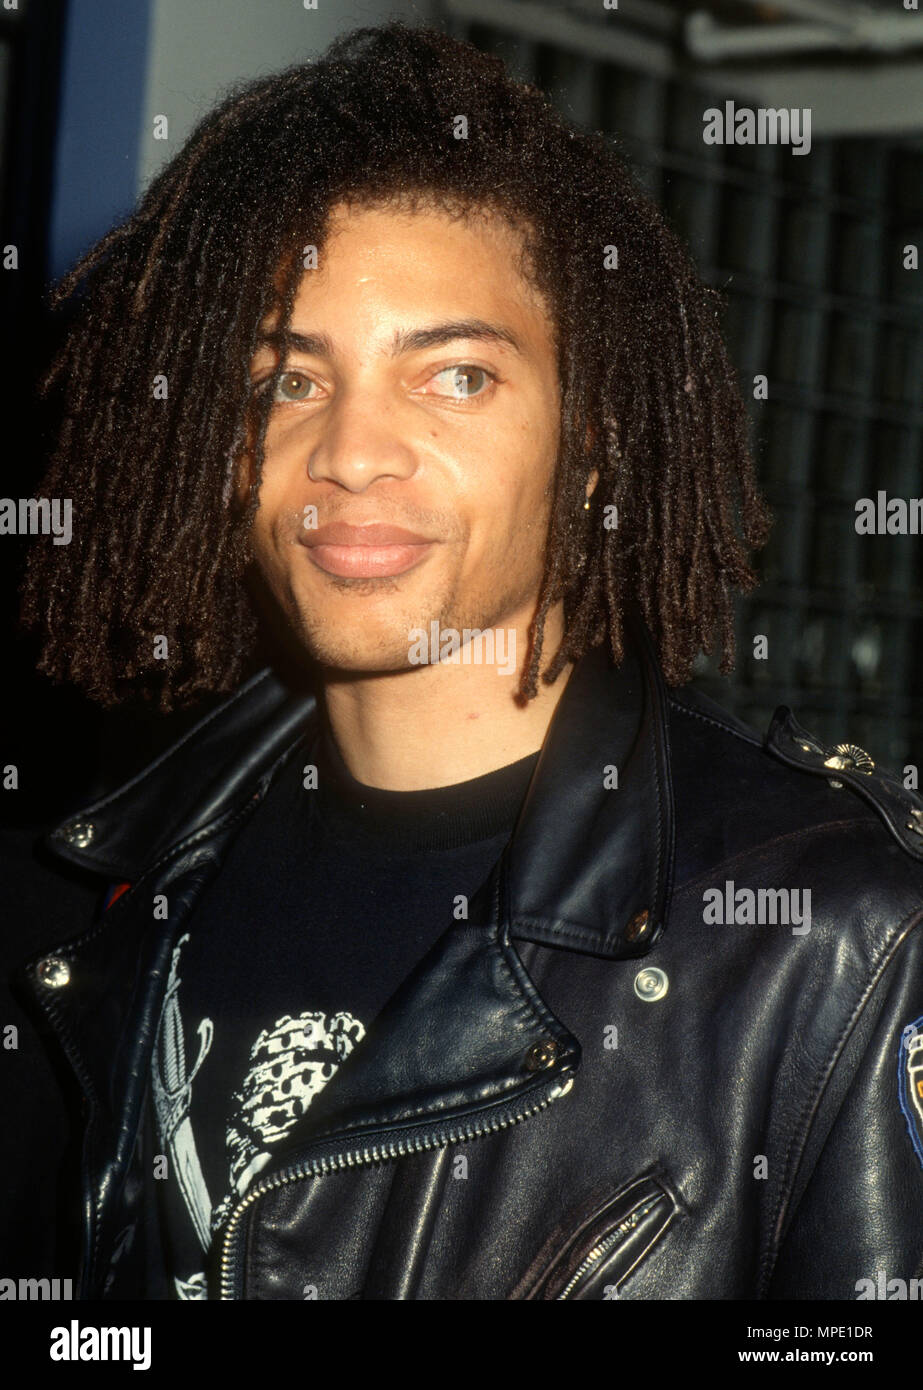 Santa Monica Ca January 31 Singer Terence Trent D Arby Attend Pollack Media Group S Eighth Annual Radio And Music Conference On January 31 1991 At The Museum Of Flying In Santa Monica